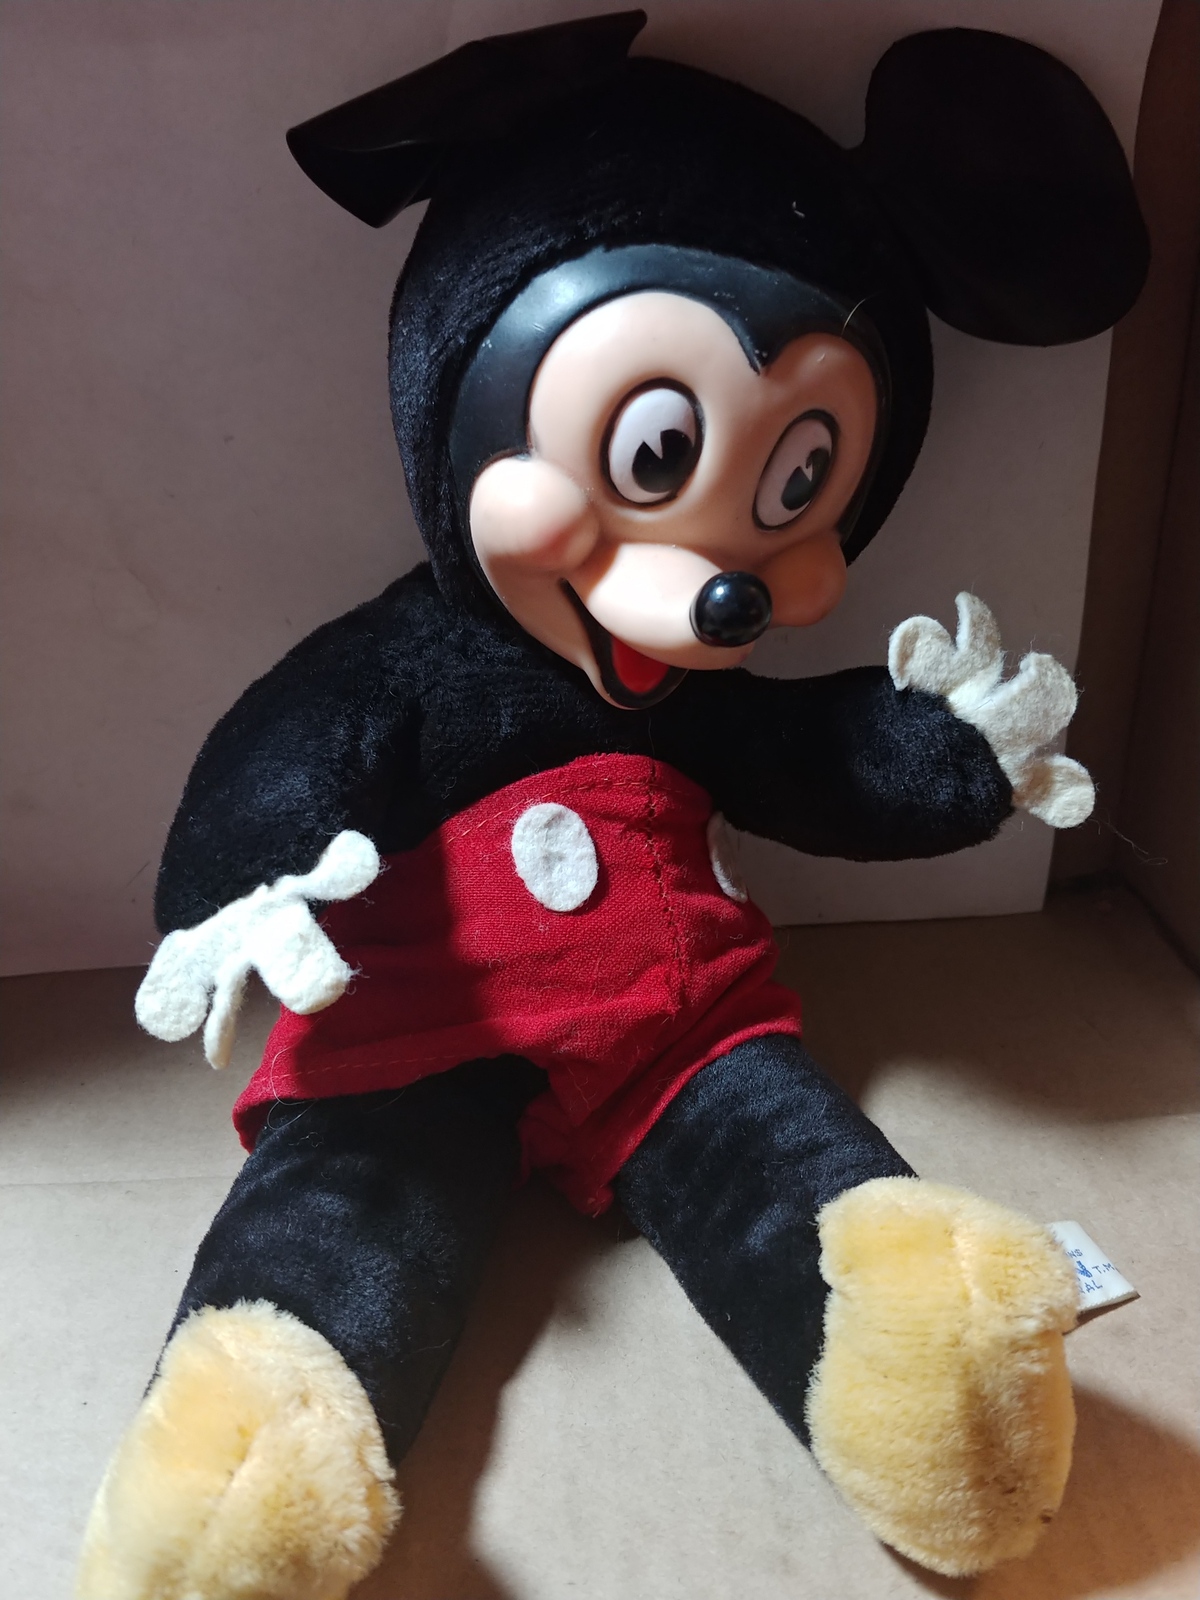 Vintage Mickey Mouse Scarecrow Costume Disney 9" Bean Bag Plush Toy 90s for sale online 